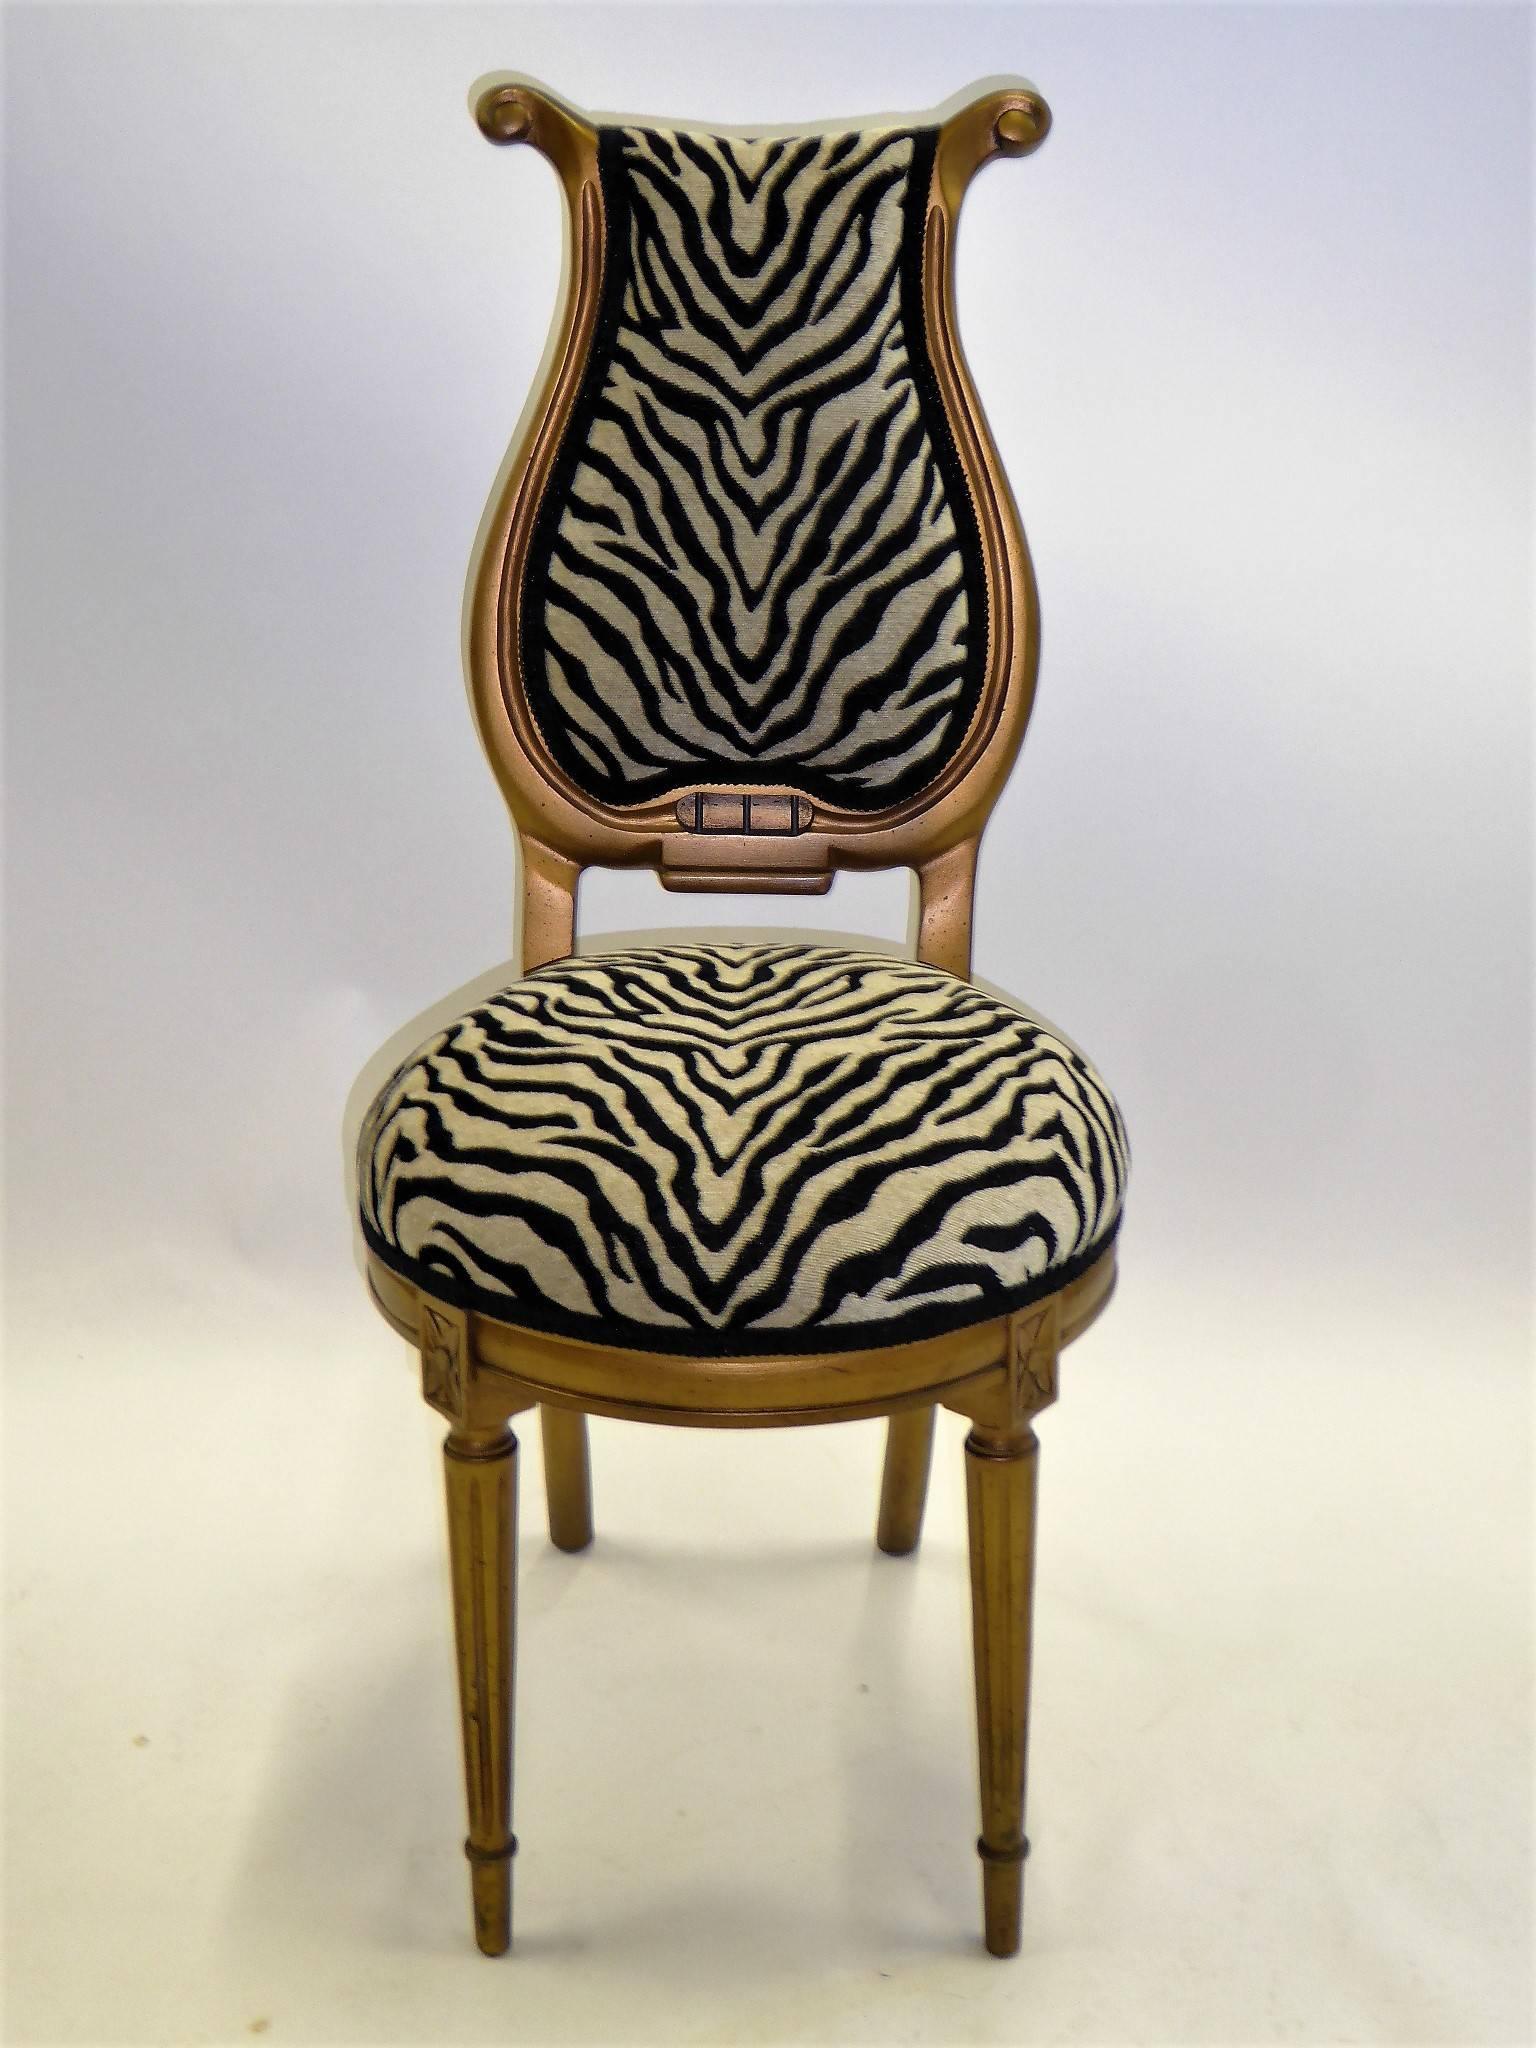 1940s stylized musical motif side chair upholstered in luxe chenille zebra fabric. With a streamline modern lyre shaped back and Louis XVI style front legs, it has soft gilt gold finish.


Measurements: 39 inches high back x 17 inches wide x 23